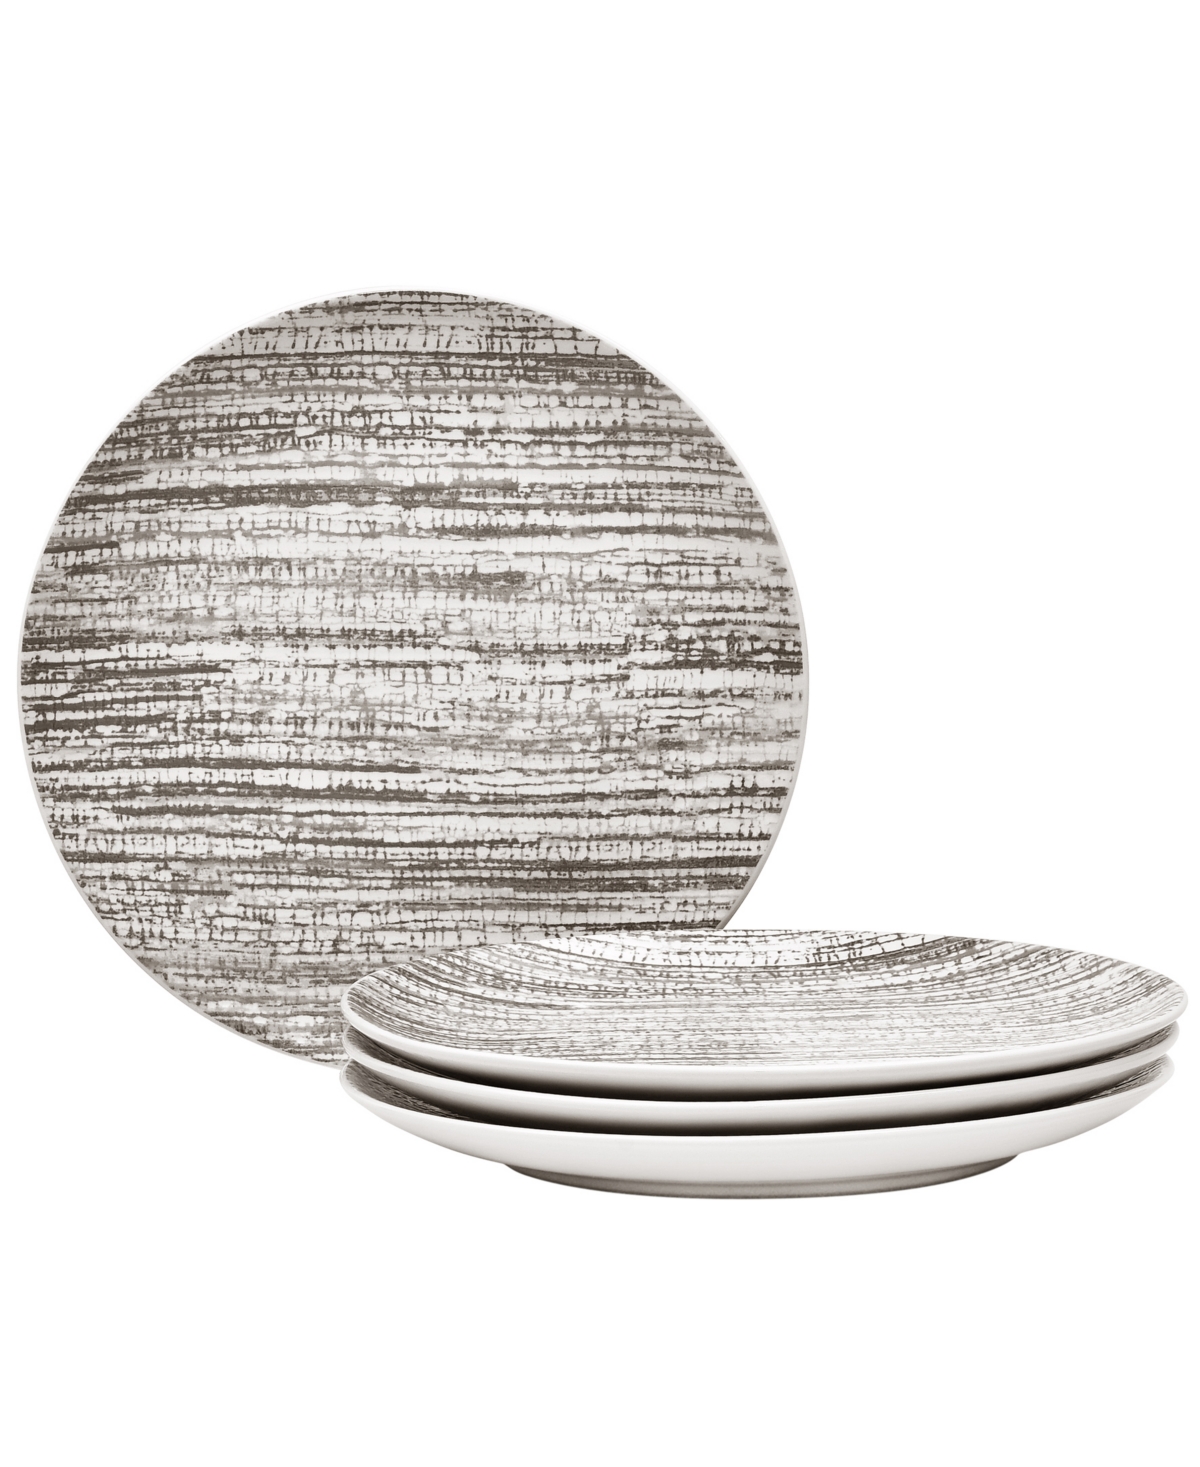 Colorwave Weave Set Of 4 Accent Plates, 8.25" - Slate